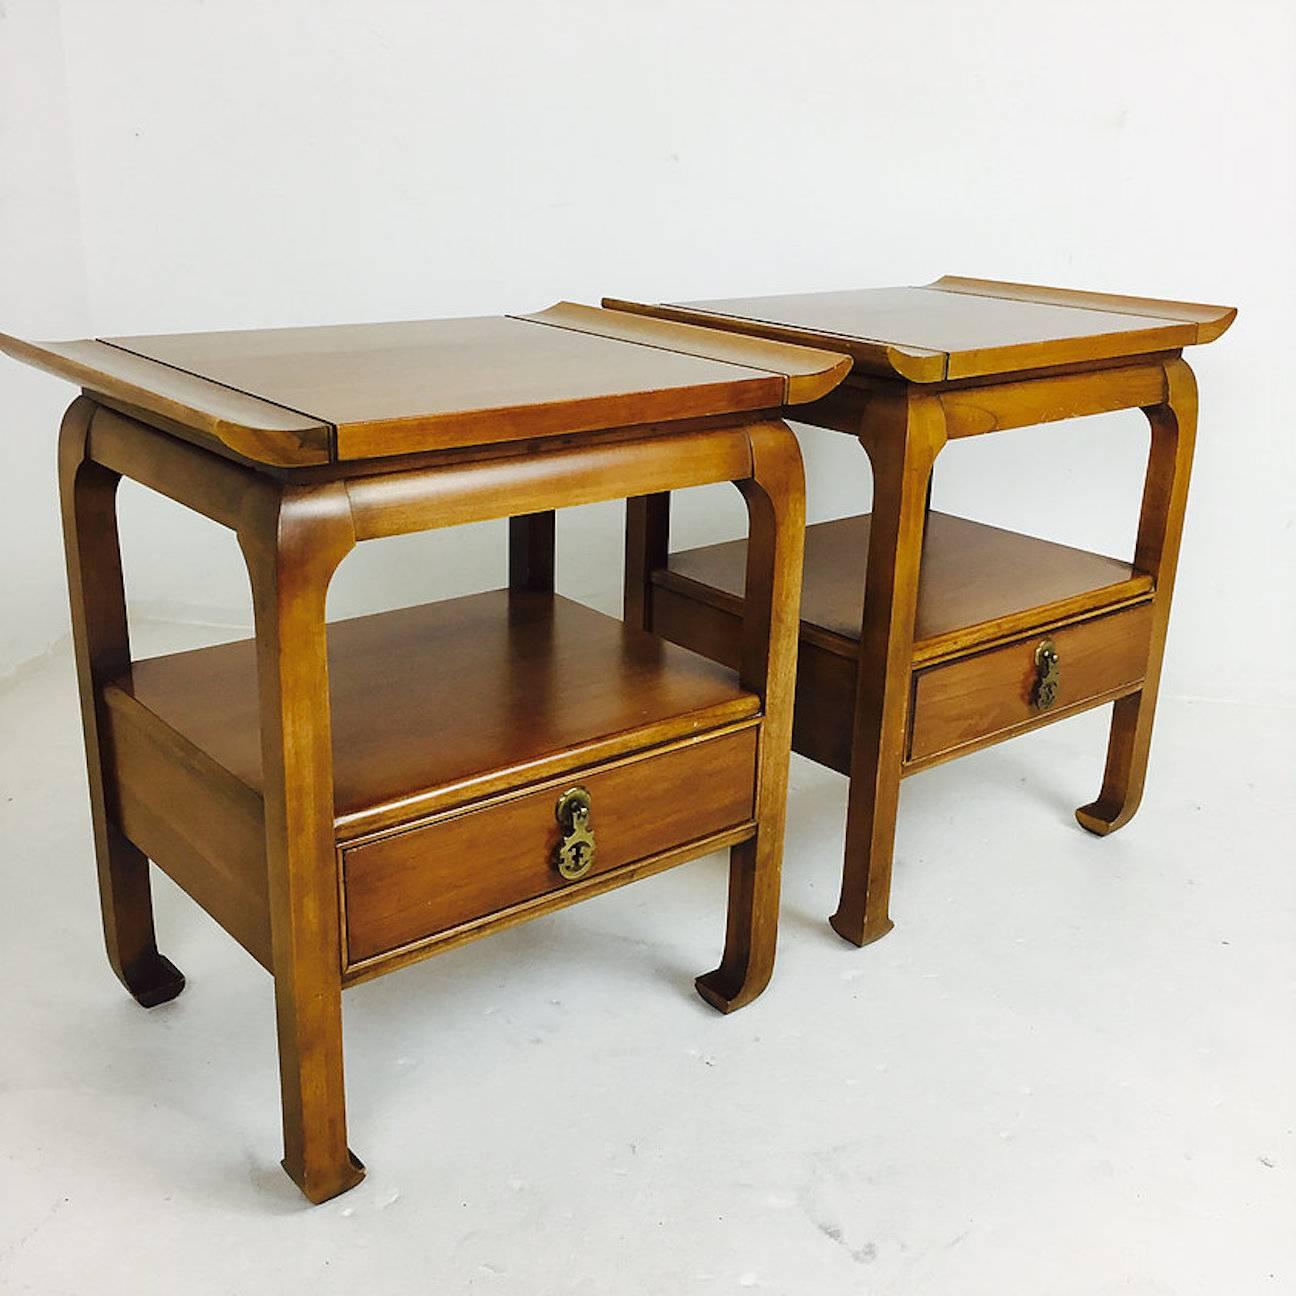 Pair of Mid-Century Pagoda style nightstands/side tables. The nightstands have a patina brass Asian influenced hardware. There is minor visible wear due to age an usage. circa 1960s

dimensions: 24"wide  17"deep  26"tall.